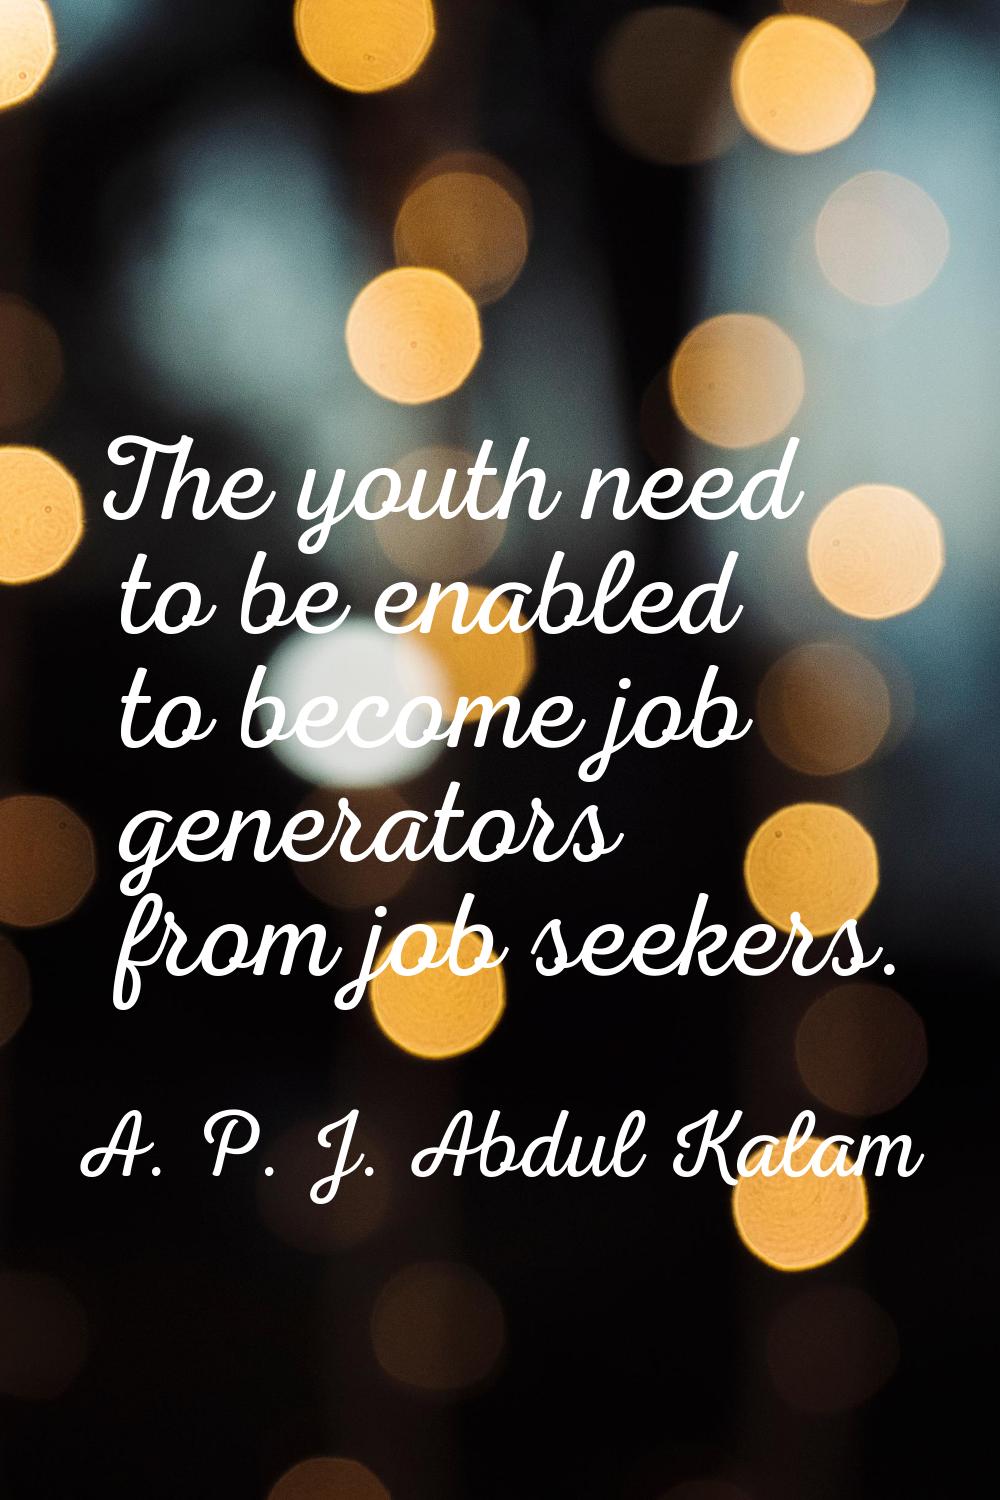 The youth need to be enabled to become job generators from job seekers.